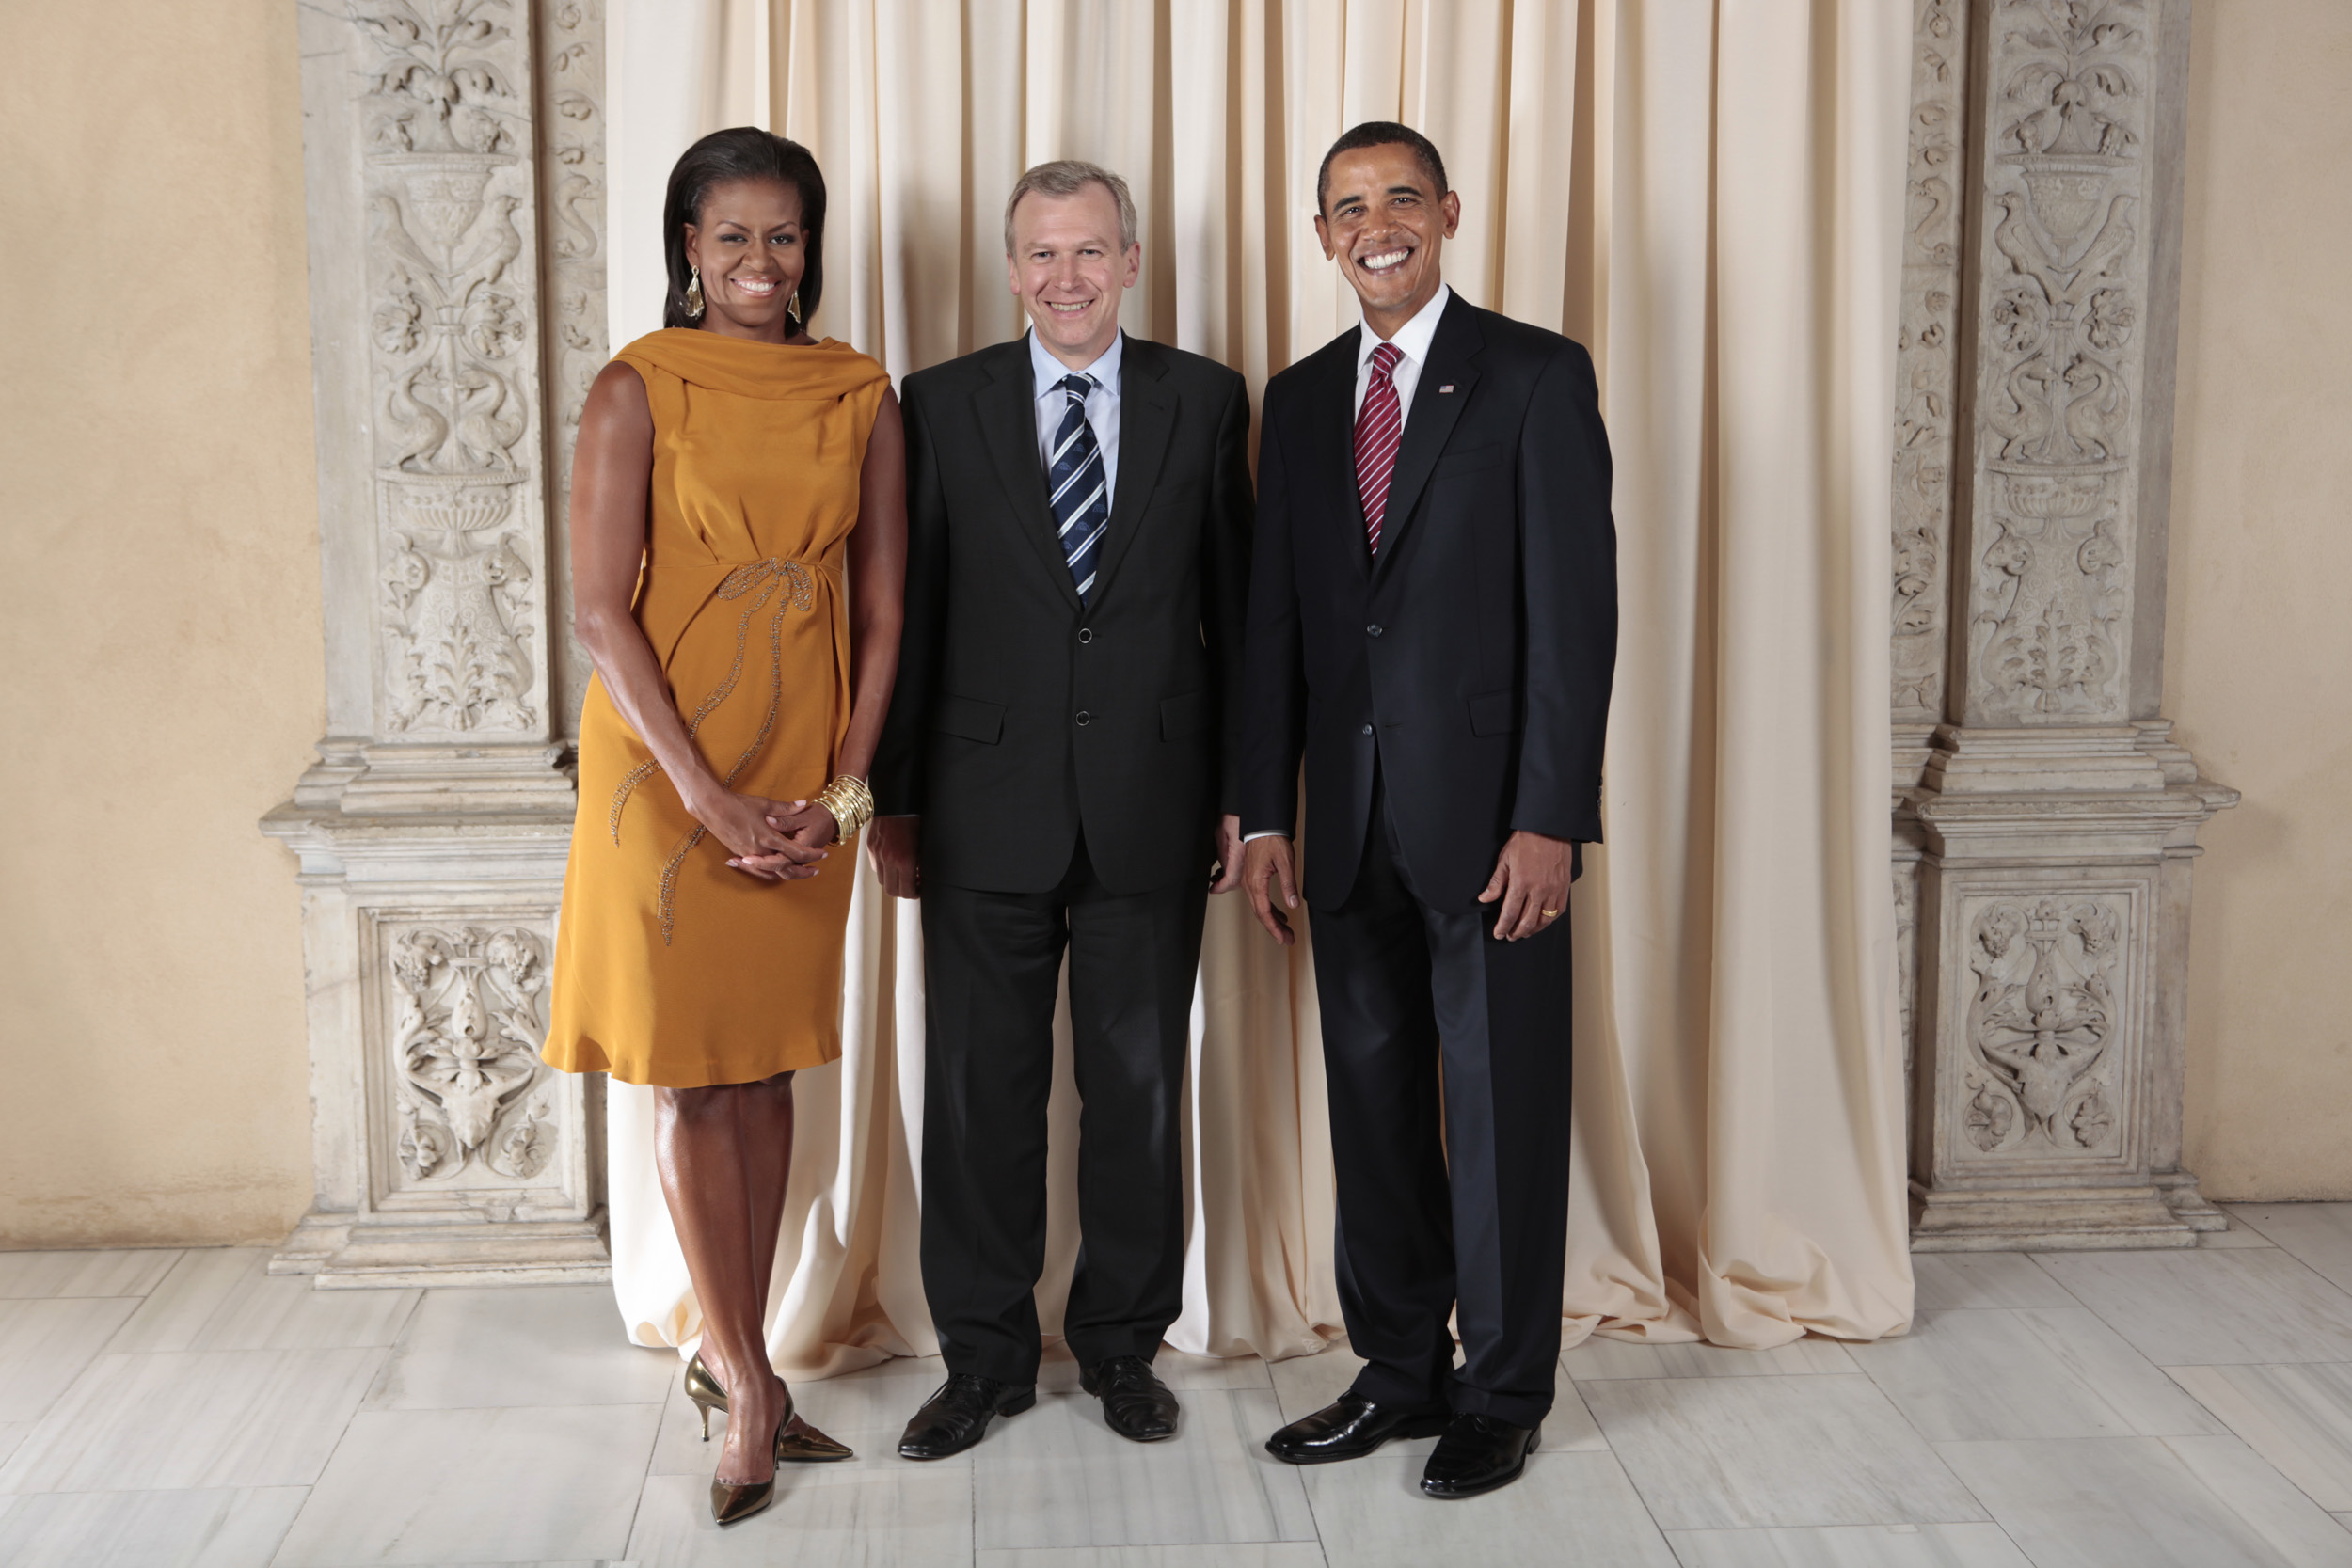 Yves Leterme with Obamas